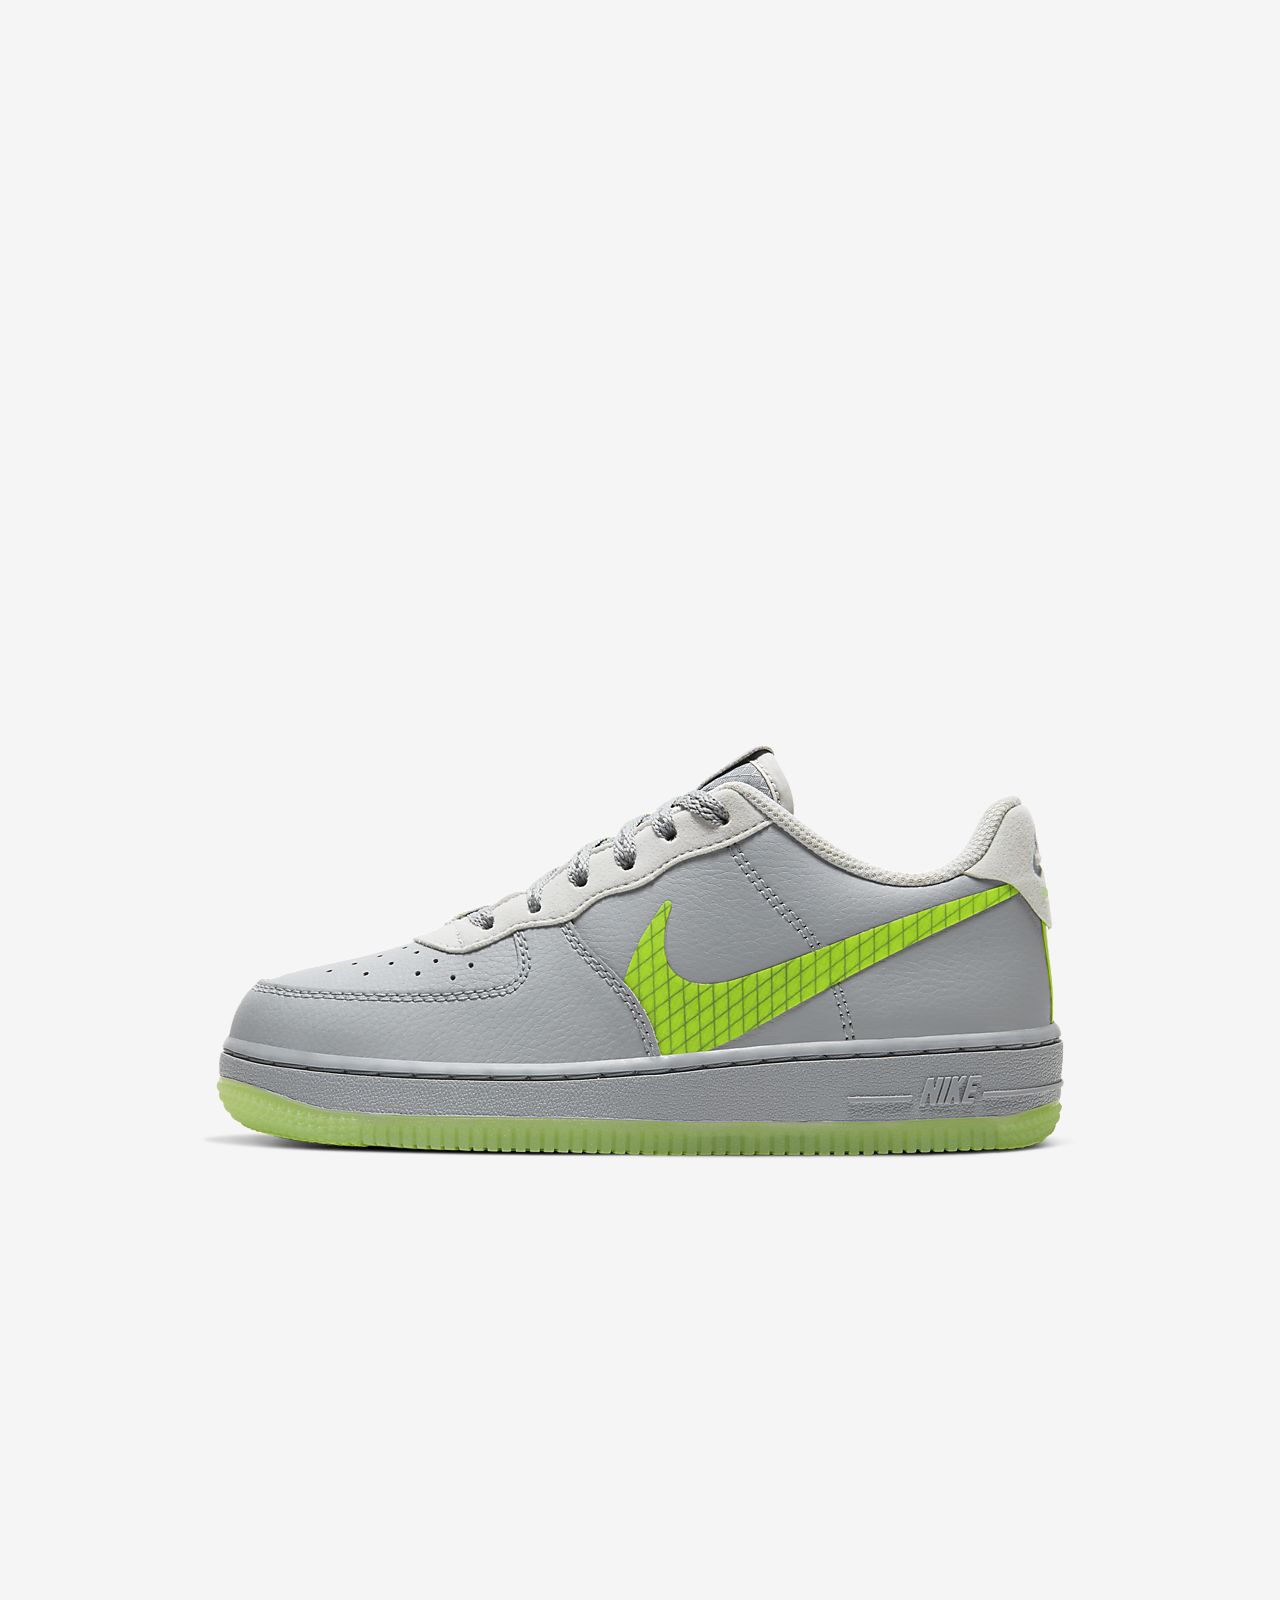 light grey air force 1 lv8 3 trainers